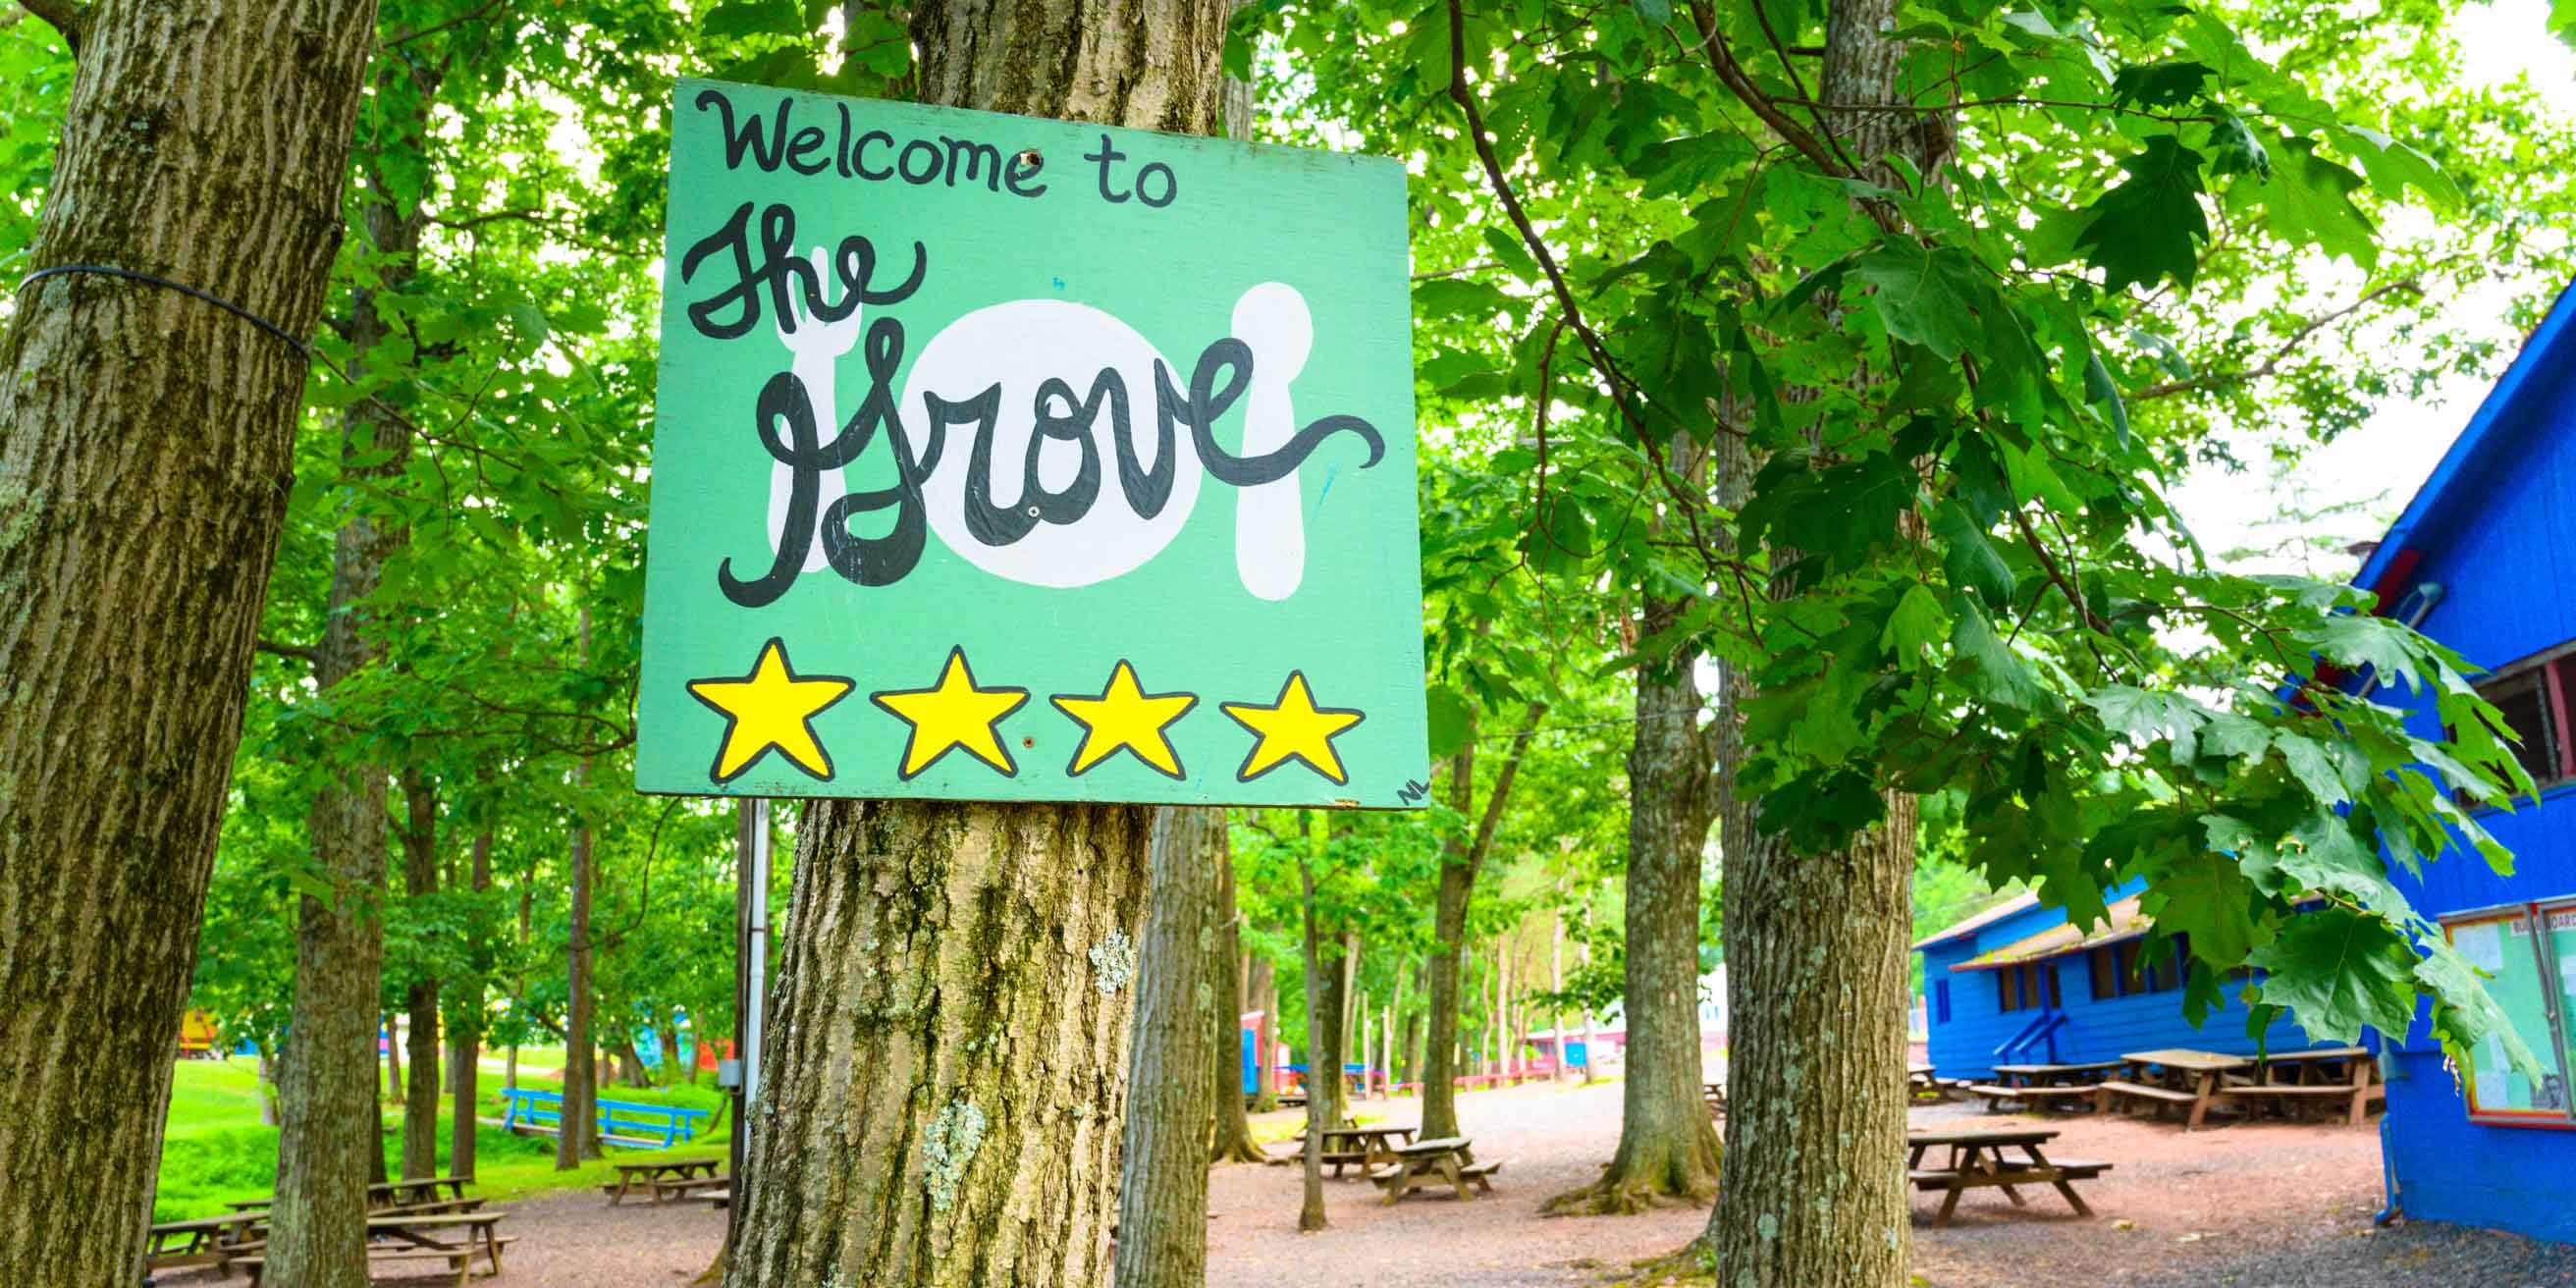 The Grove sign by picnic area